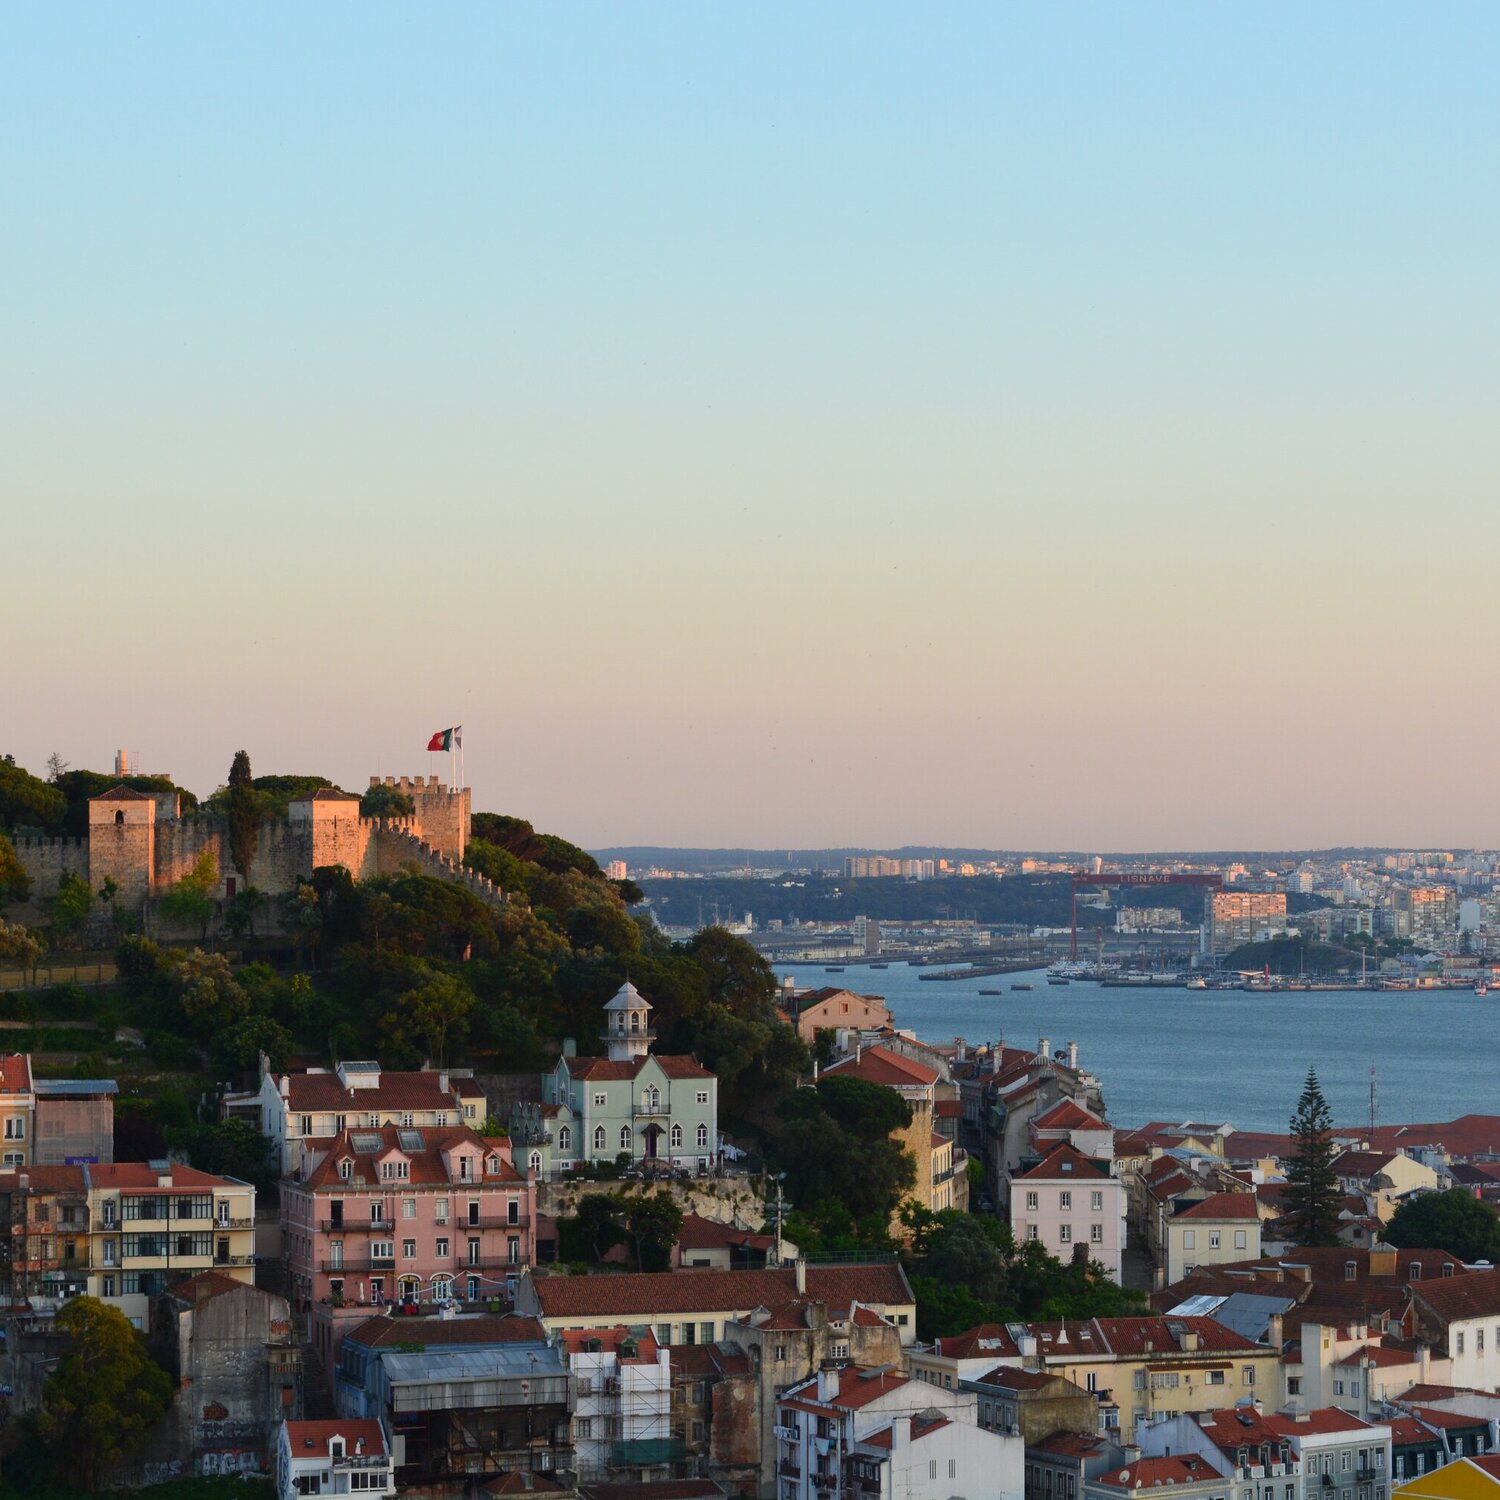 Top 7 Lisbon attractions: what to see in one day